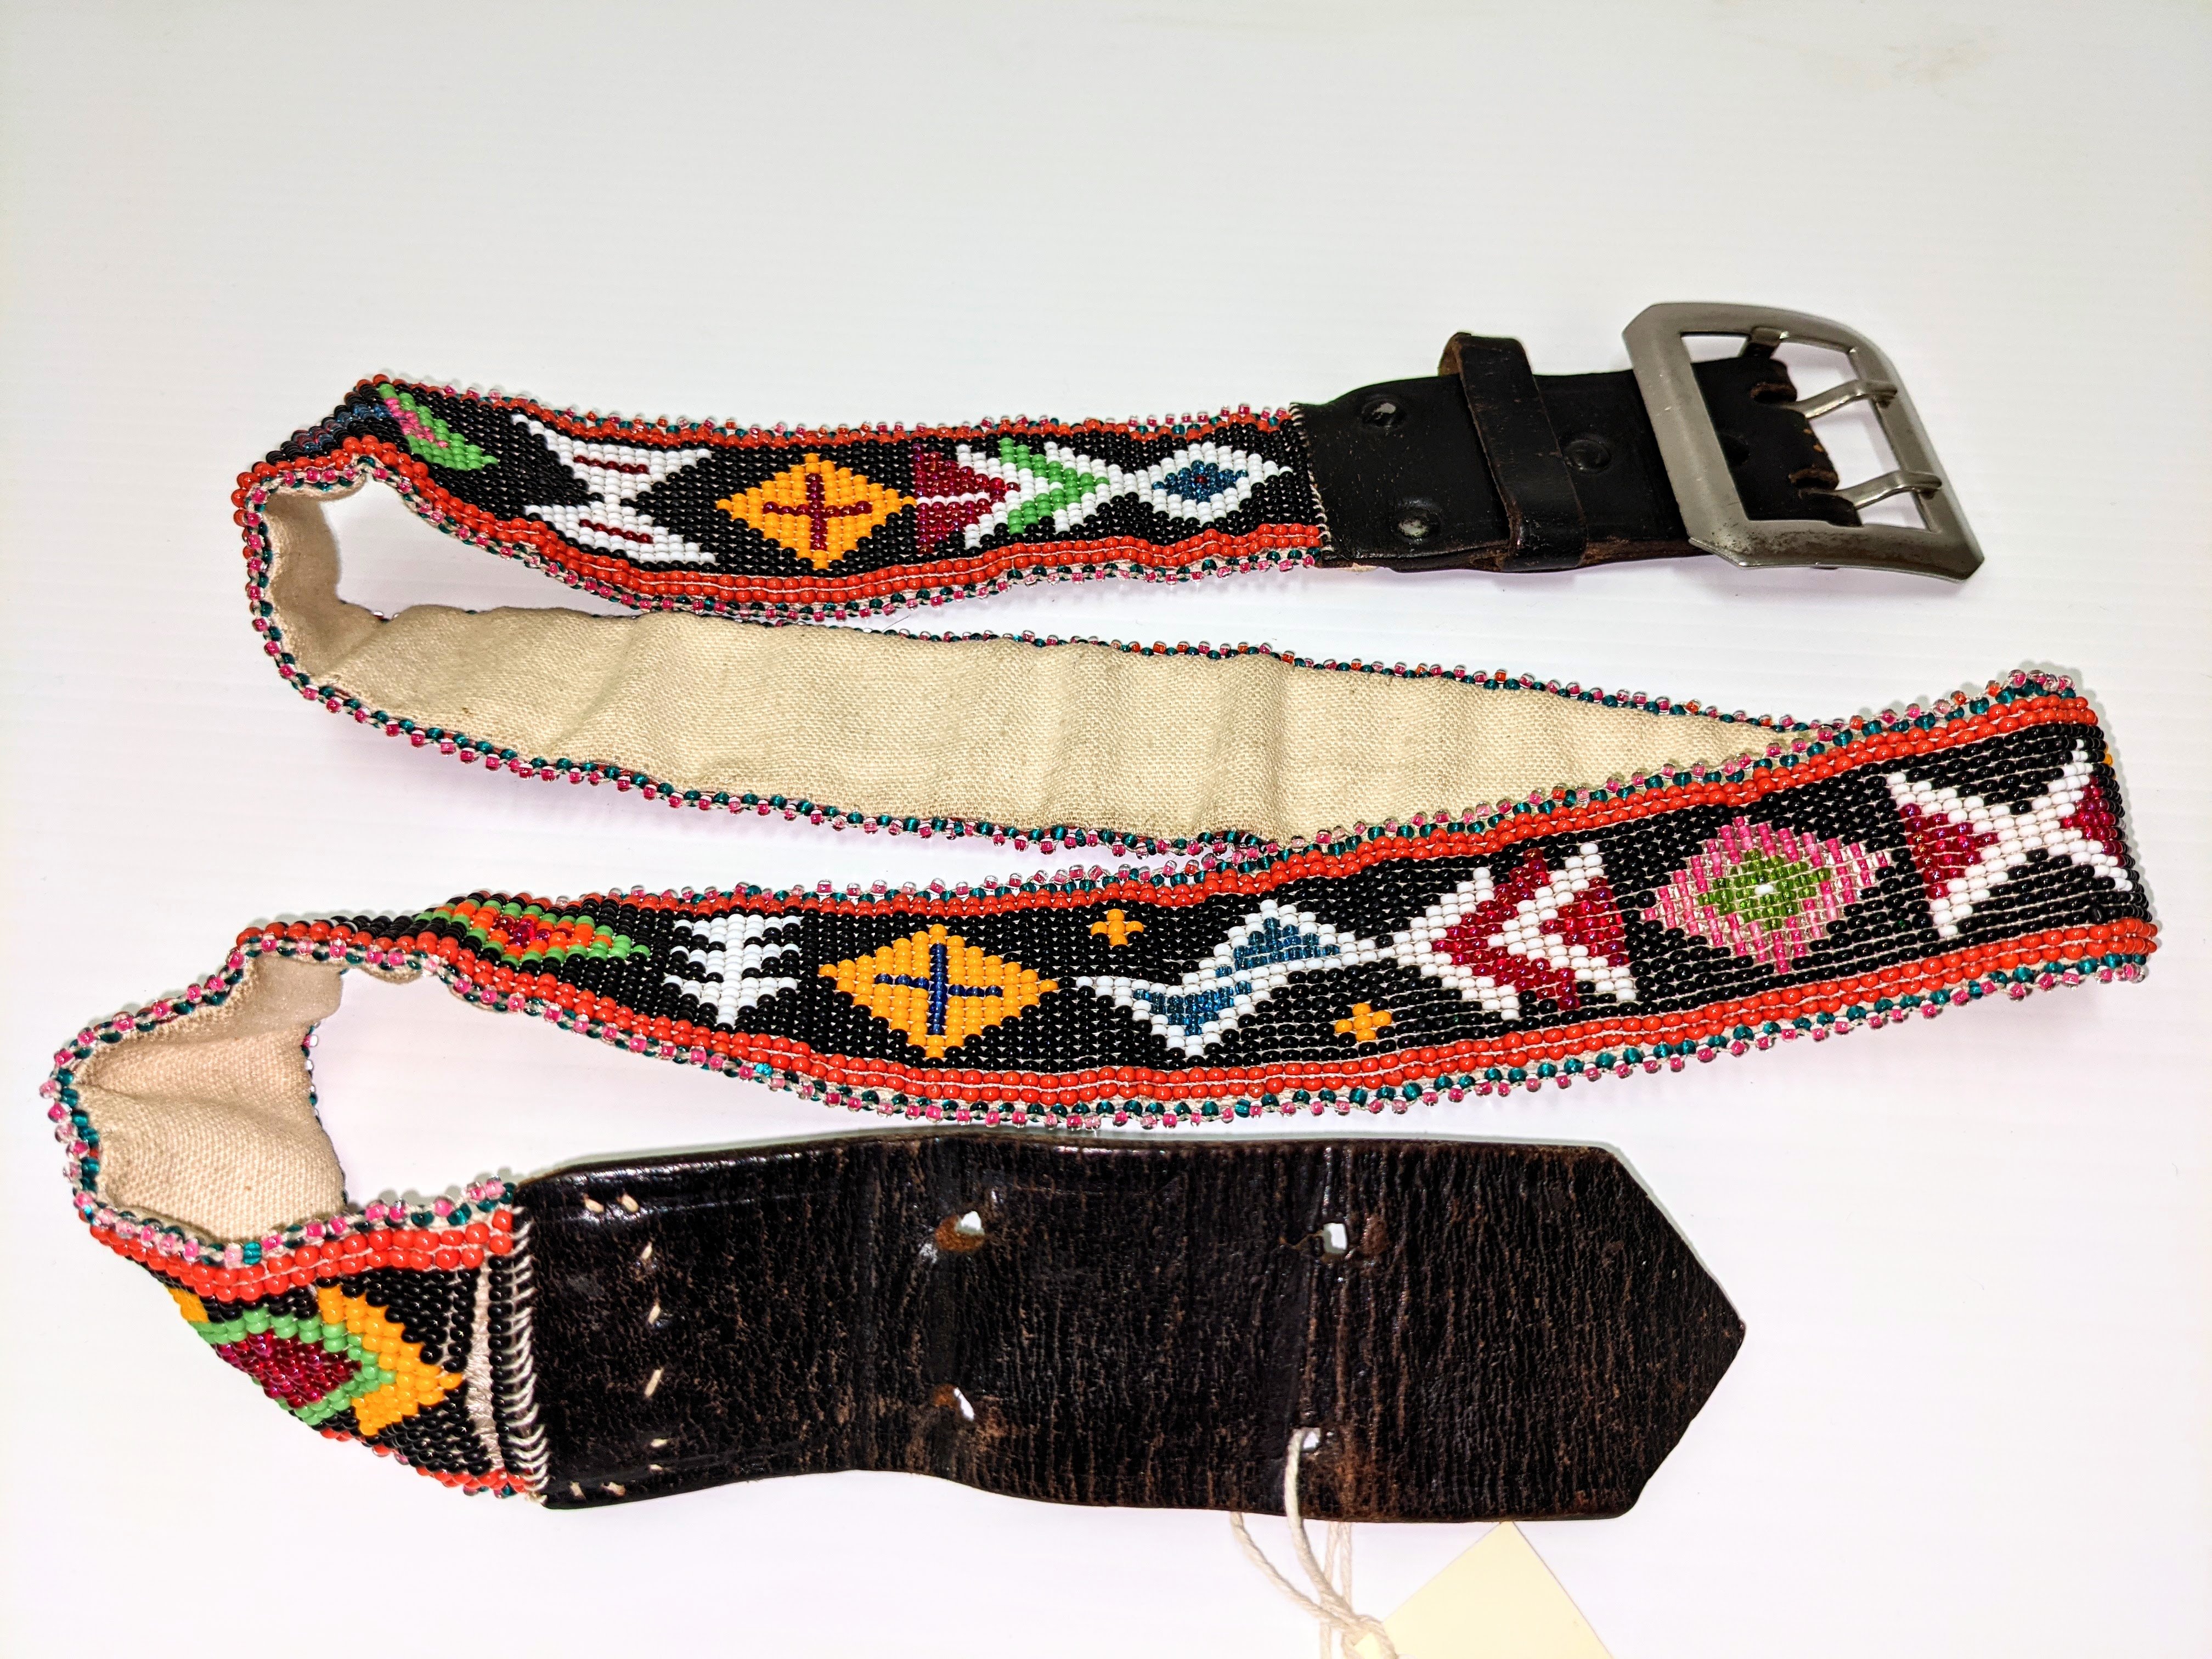  Although we do not have information on the artisan or the age of this beautiful artifact, the composition of the piece make it very interesting. First you will notice the incredibly uniform and intricate beadwork - typical of many indigenous artists. Upon further inspection you can see that the belt itself is not made of leather but rather canvas. This was likely done for ease of beading - though it is possible that the artist recycled a broken belt using the hardware and leather of either end. Recycling and reusing everything from building materials, to beads has long been practiced in Fort Vermilion and is part of what has allowed the settlement to prosper since 1788!

24/05/2021
2005.44.08 / Randolph, Helen